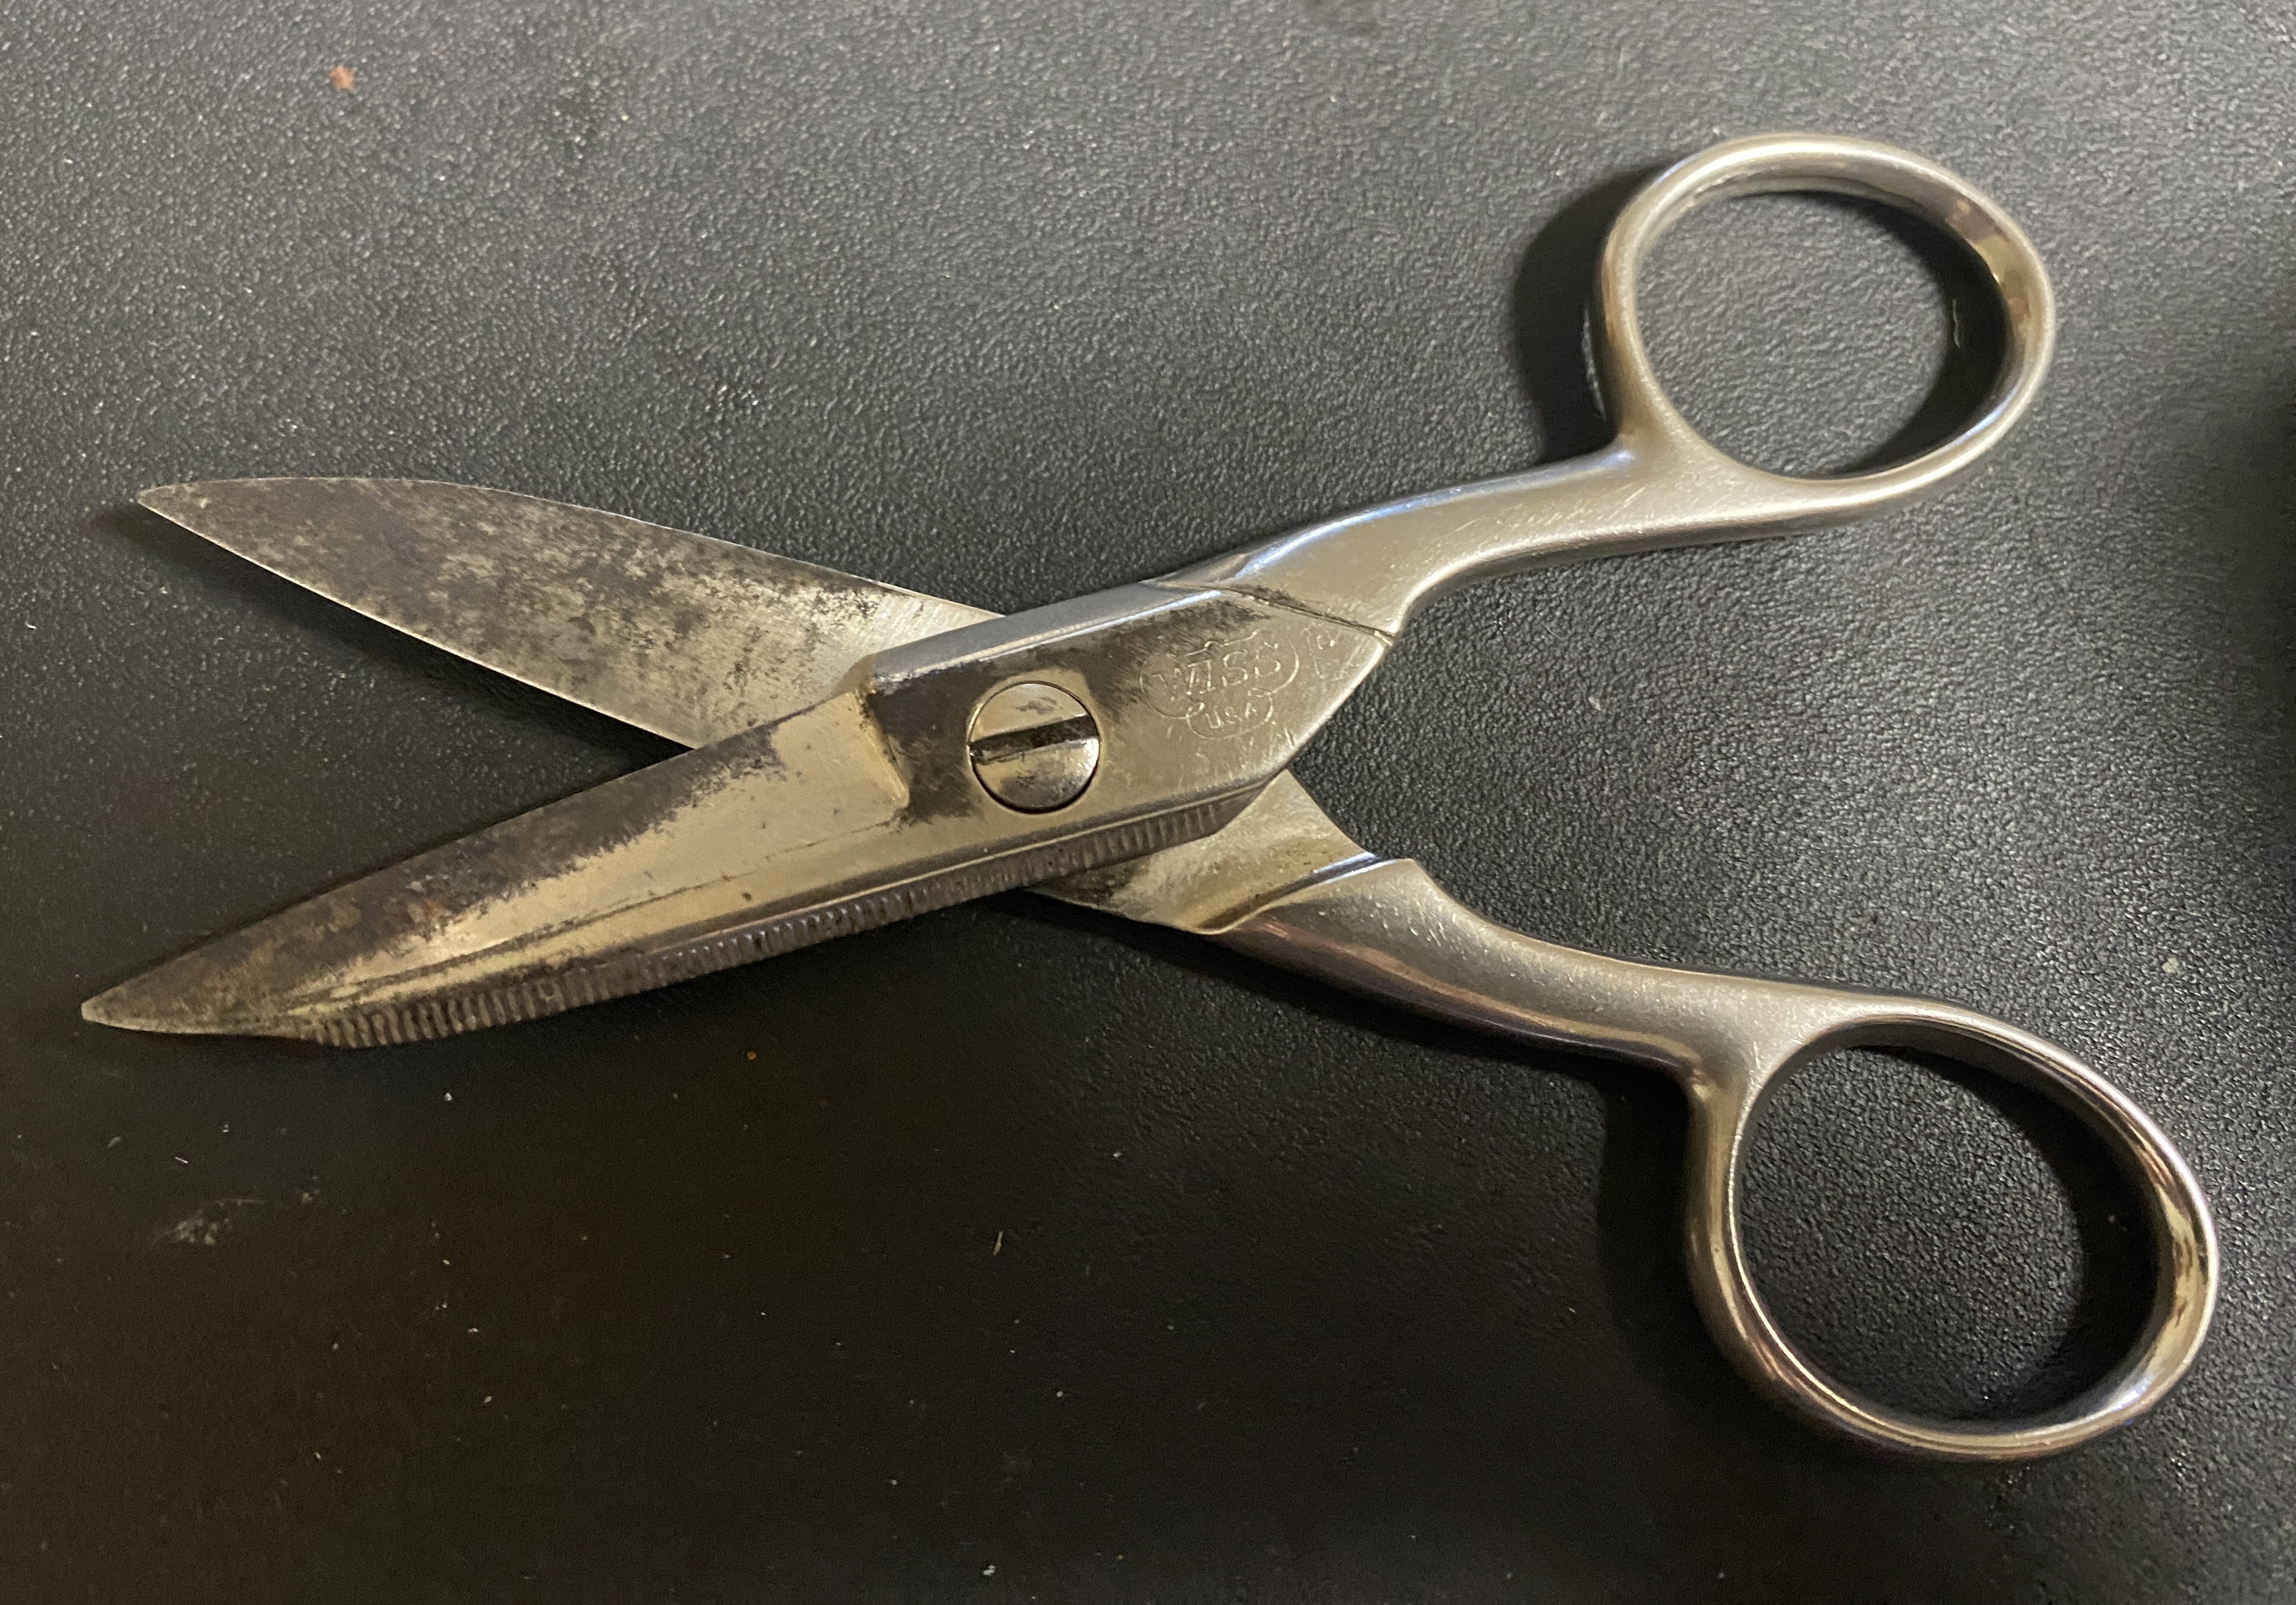 In that box lot were a nice pair of ​Wiss 175 Scissors. Still sharp too.  